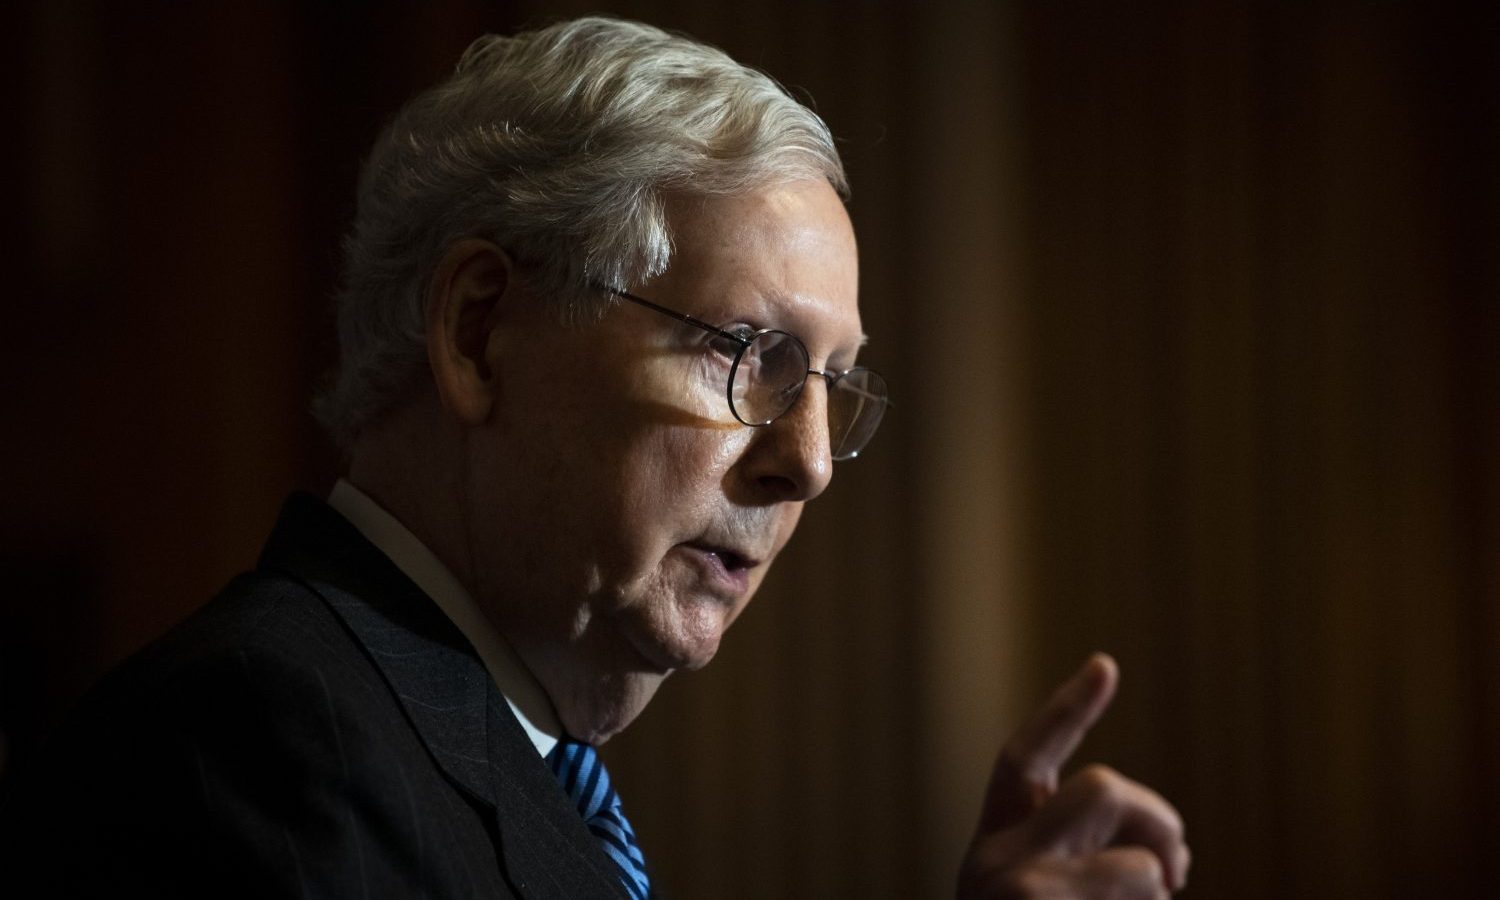 Senator Mitch McConnell Congratulates Biden, But Will He Work With Him On Weed?